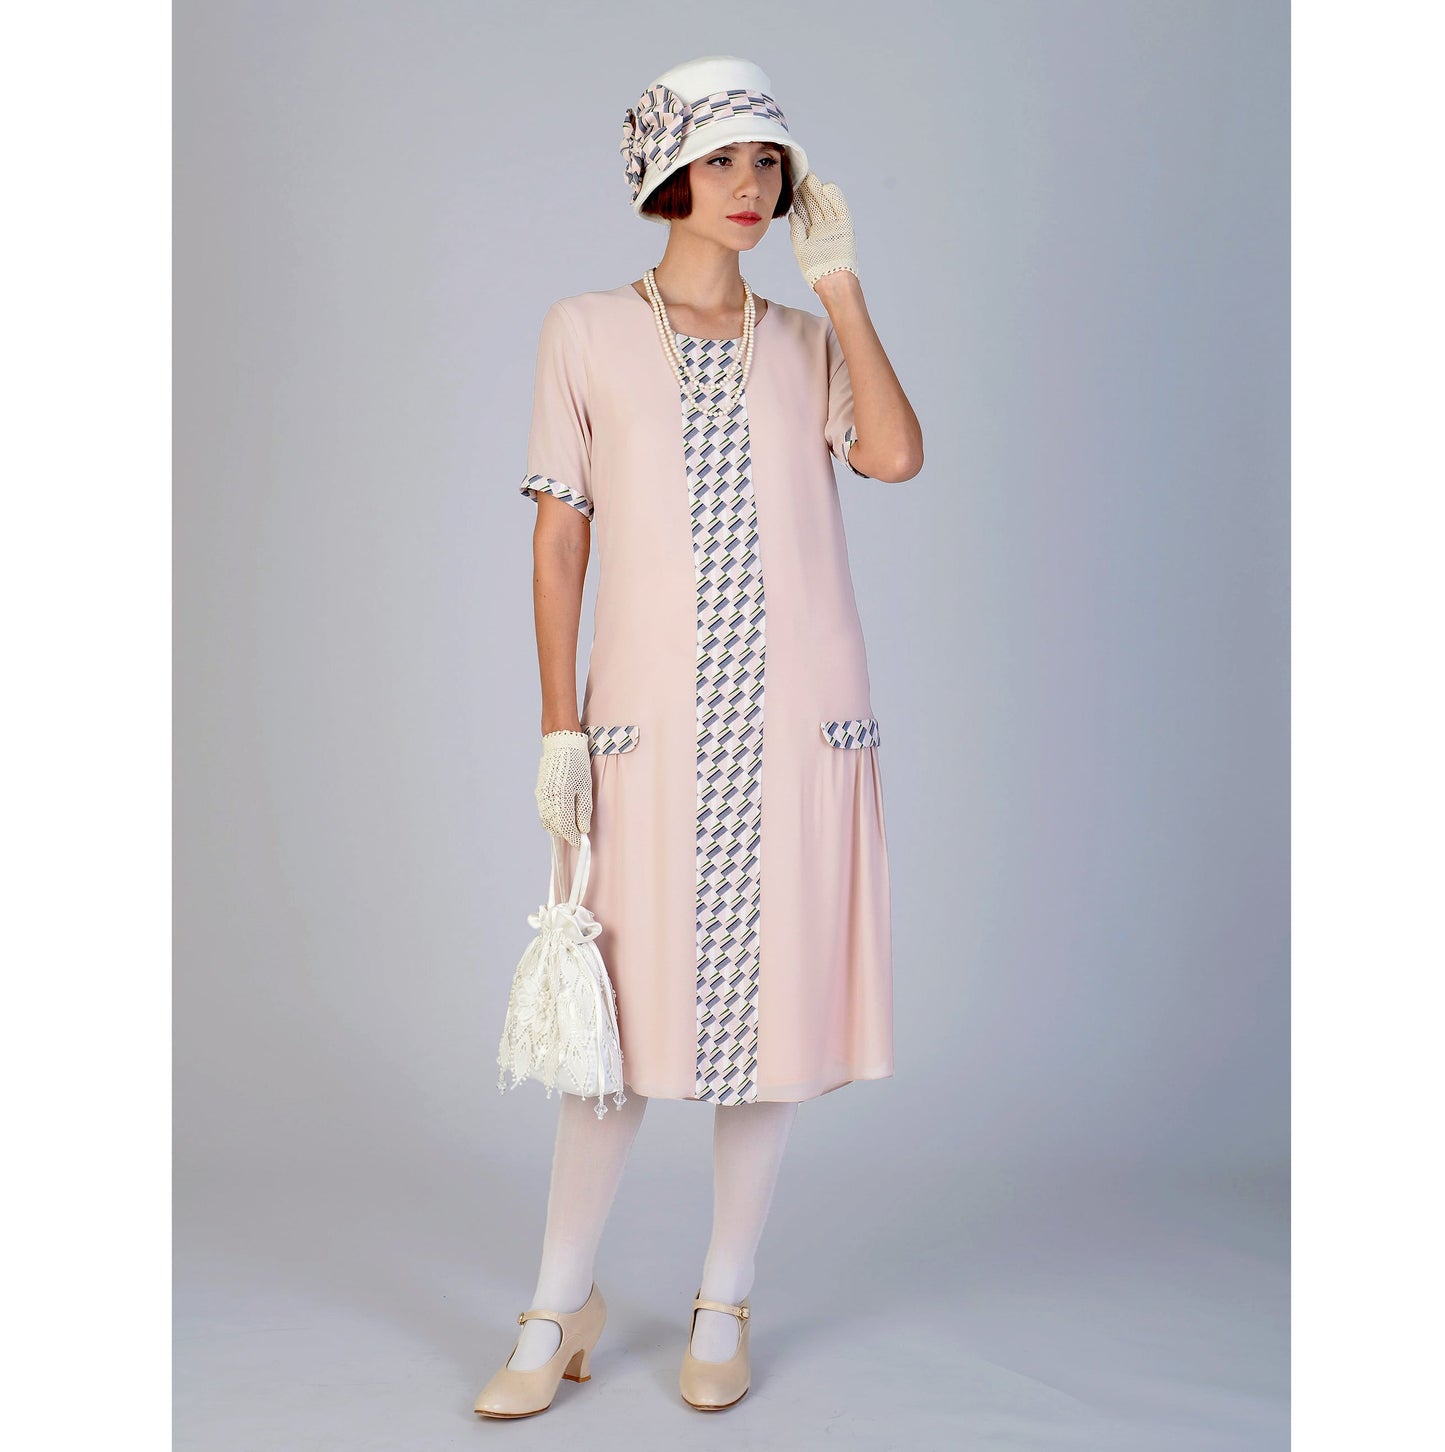 1920s cloche hat in off-white cotton and rectangular printed chiffon